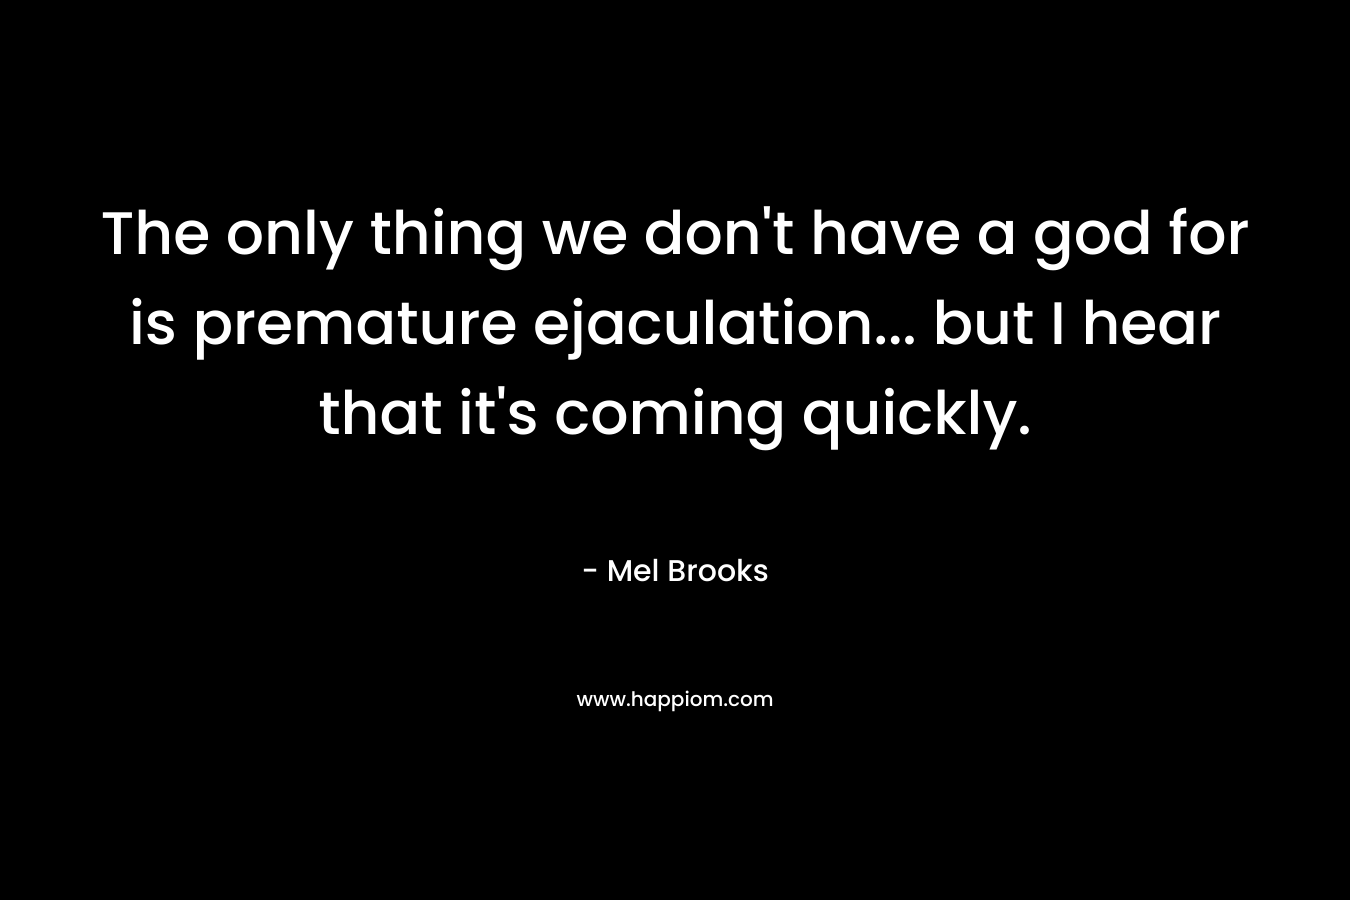 The only thing we don't have a god for is premature ejaculation... but I hear that it's coming quickly.